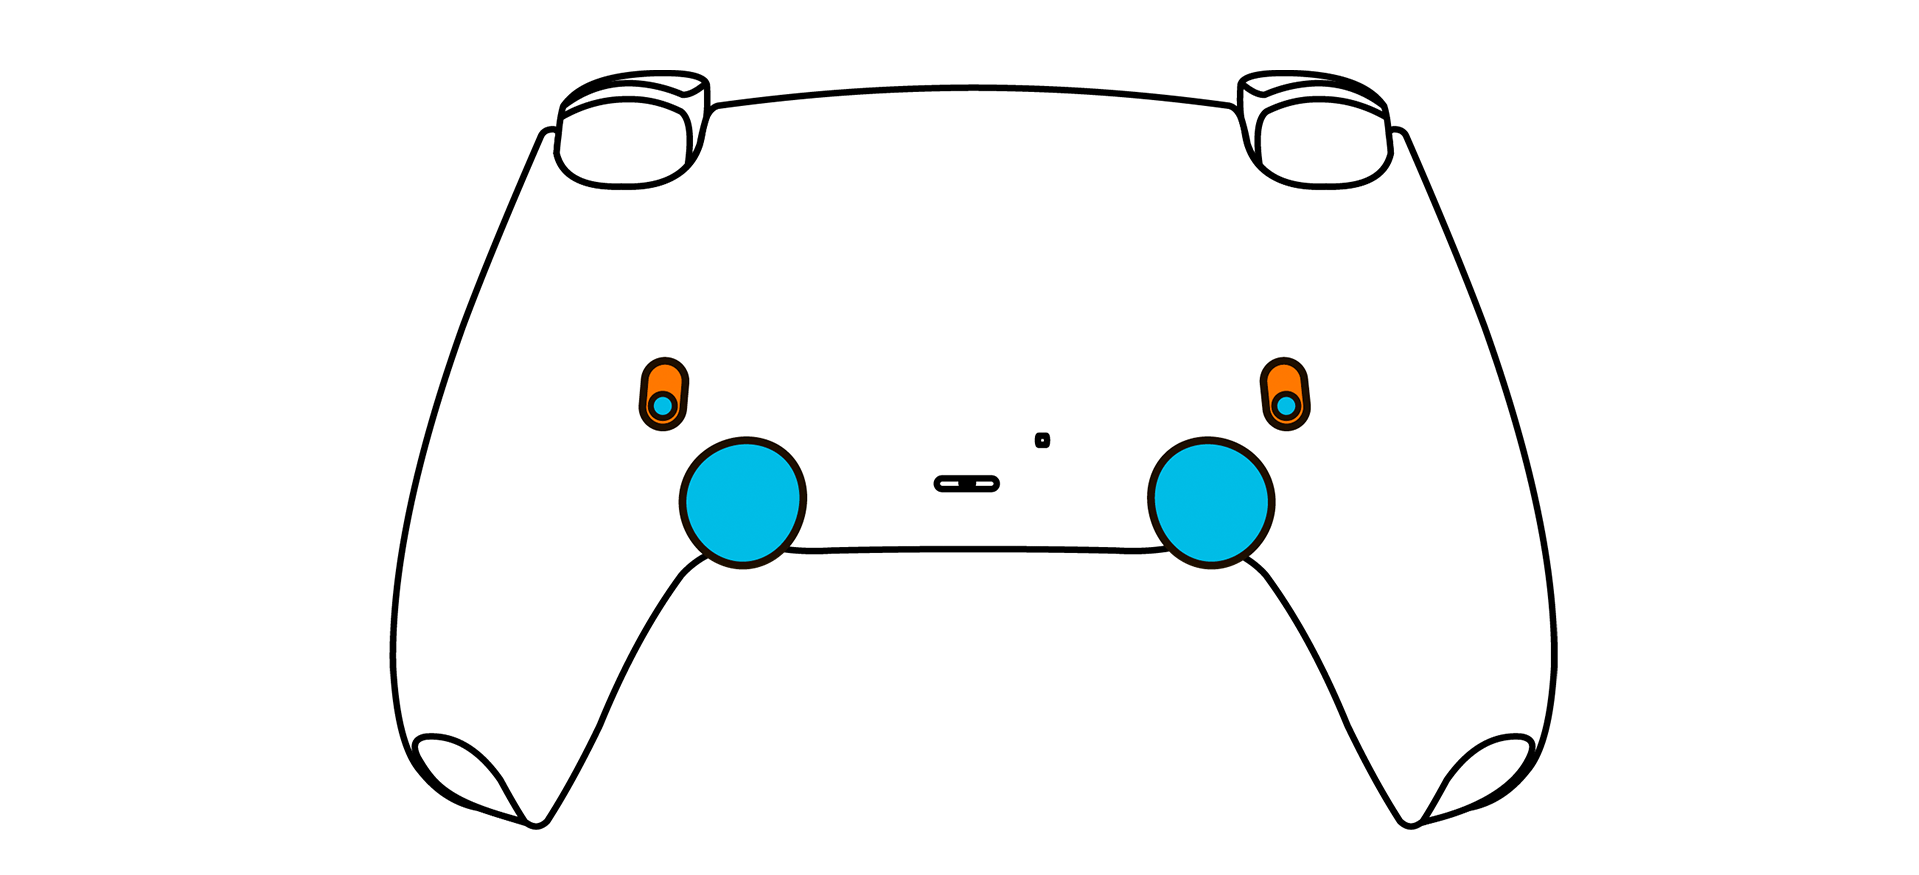 PS5 Controller With Paddles